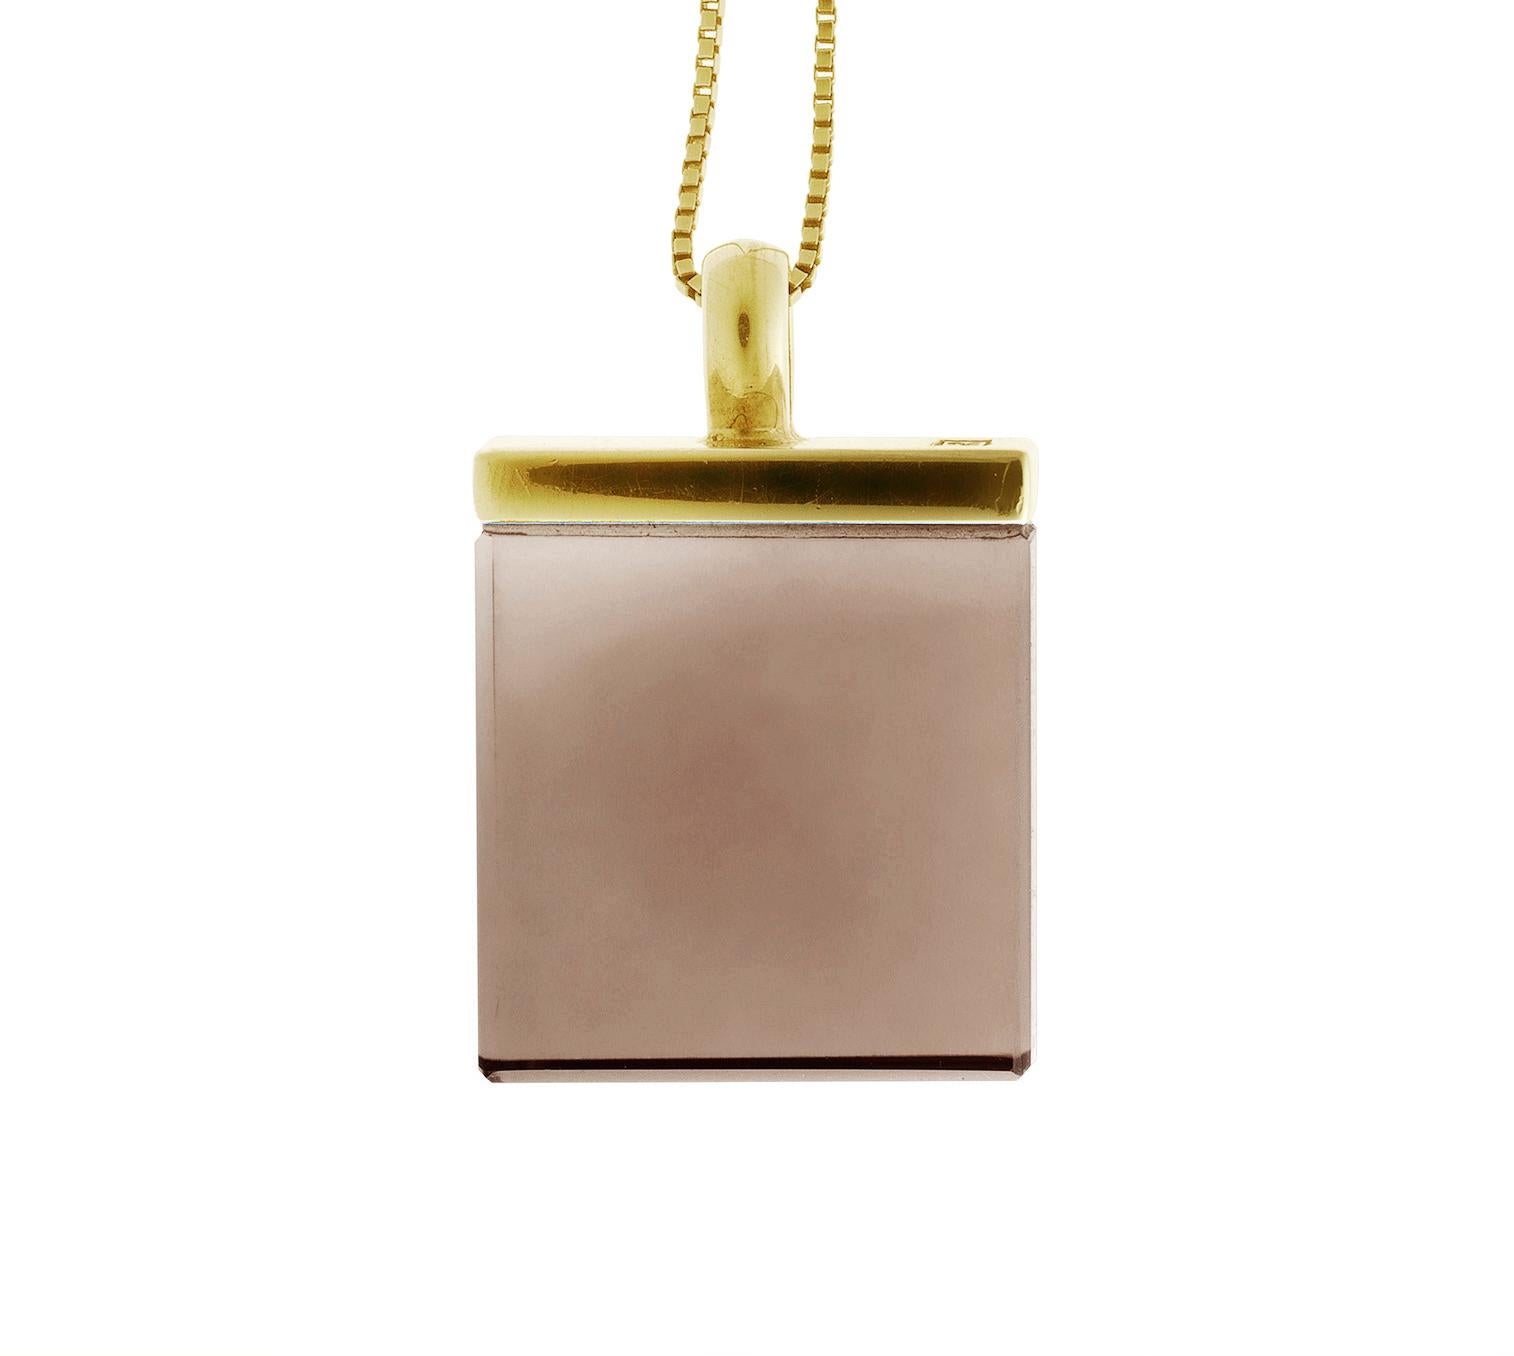 This contemporary pendant necklace is a part of the Ink collection, which has gained recognition and was featured in prestigious publications like Harper's Bazaar and Vogue UA. It was made of 18 karat yellow gold with 15x15x8 mm smoky quartz. This